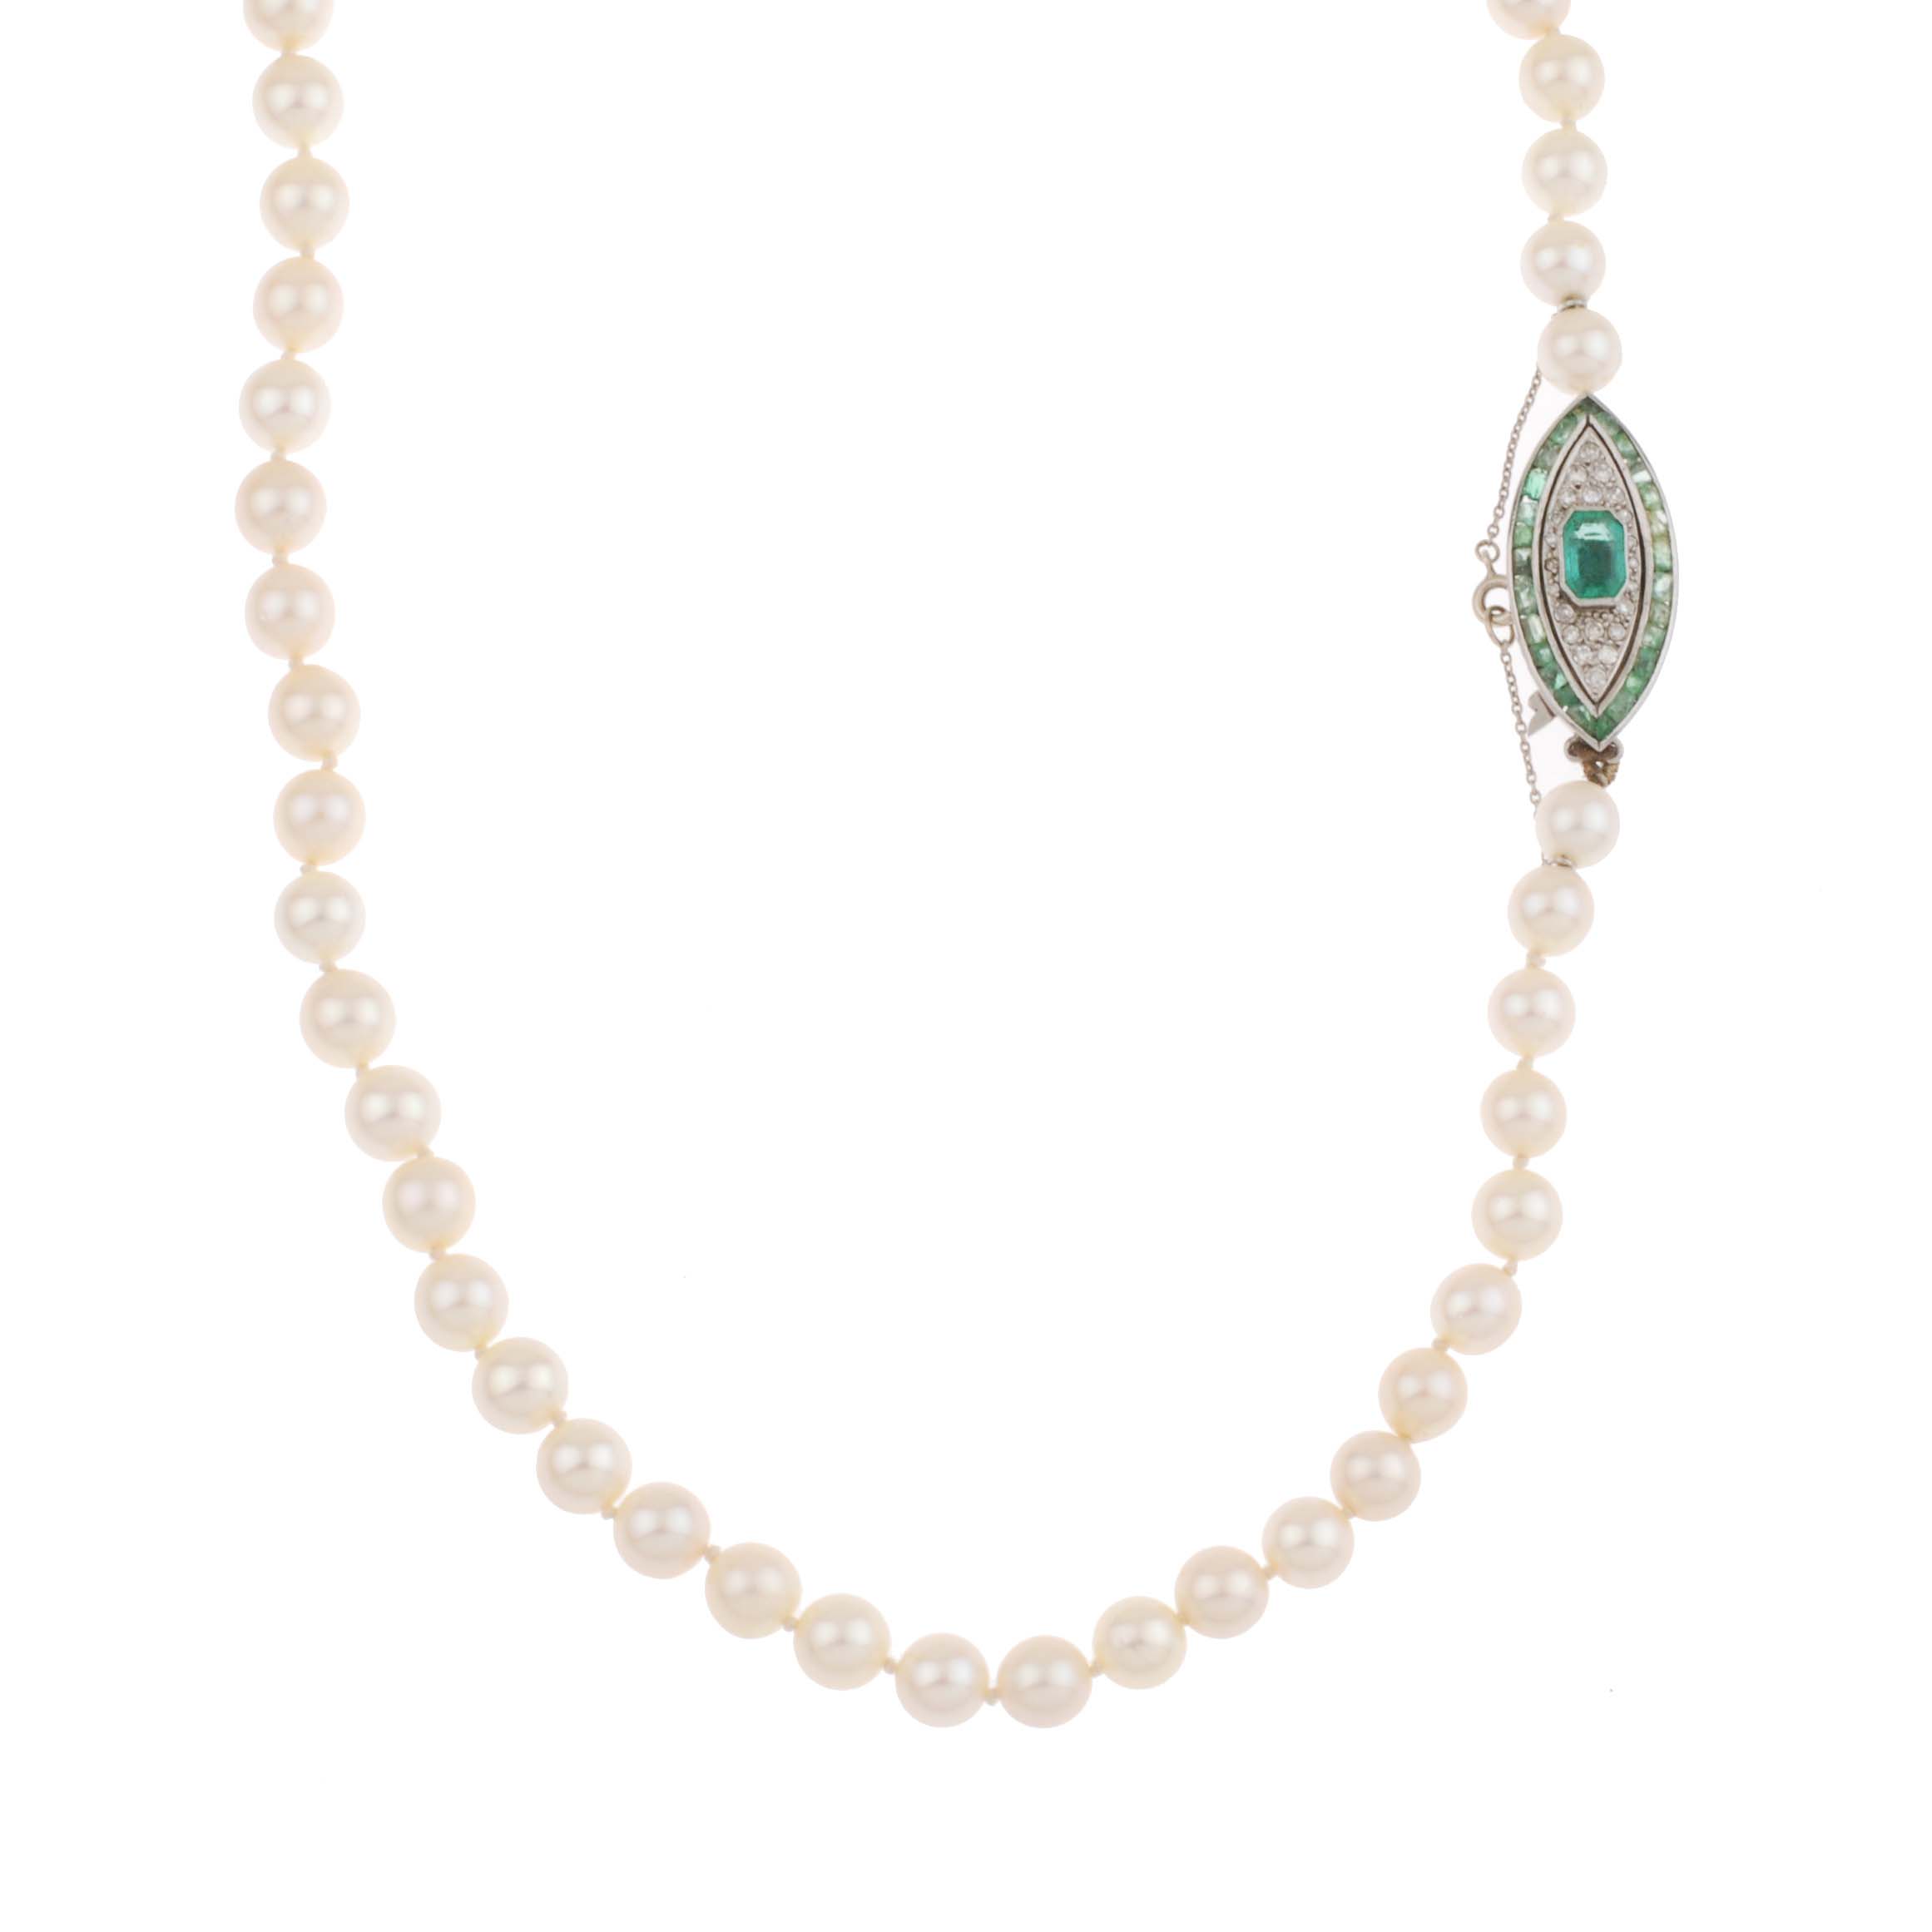 LONG PEARL NECKLACE.